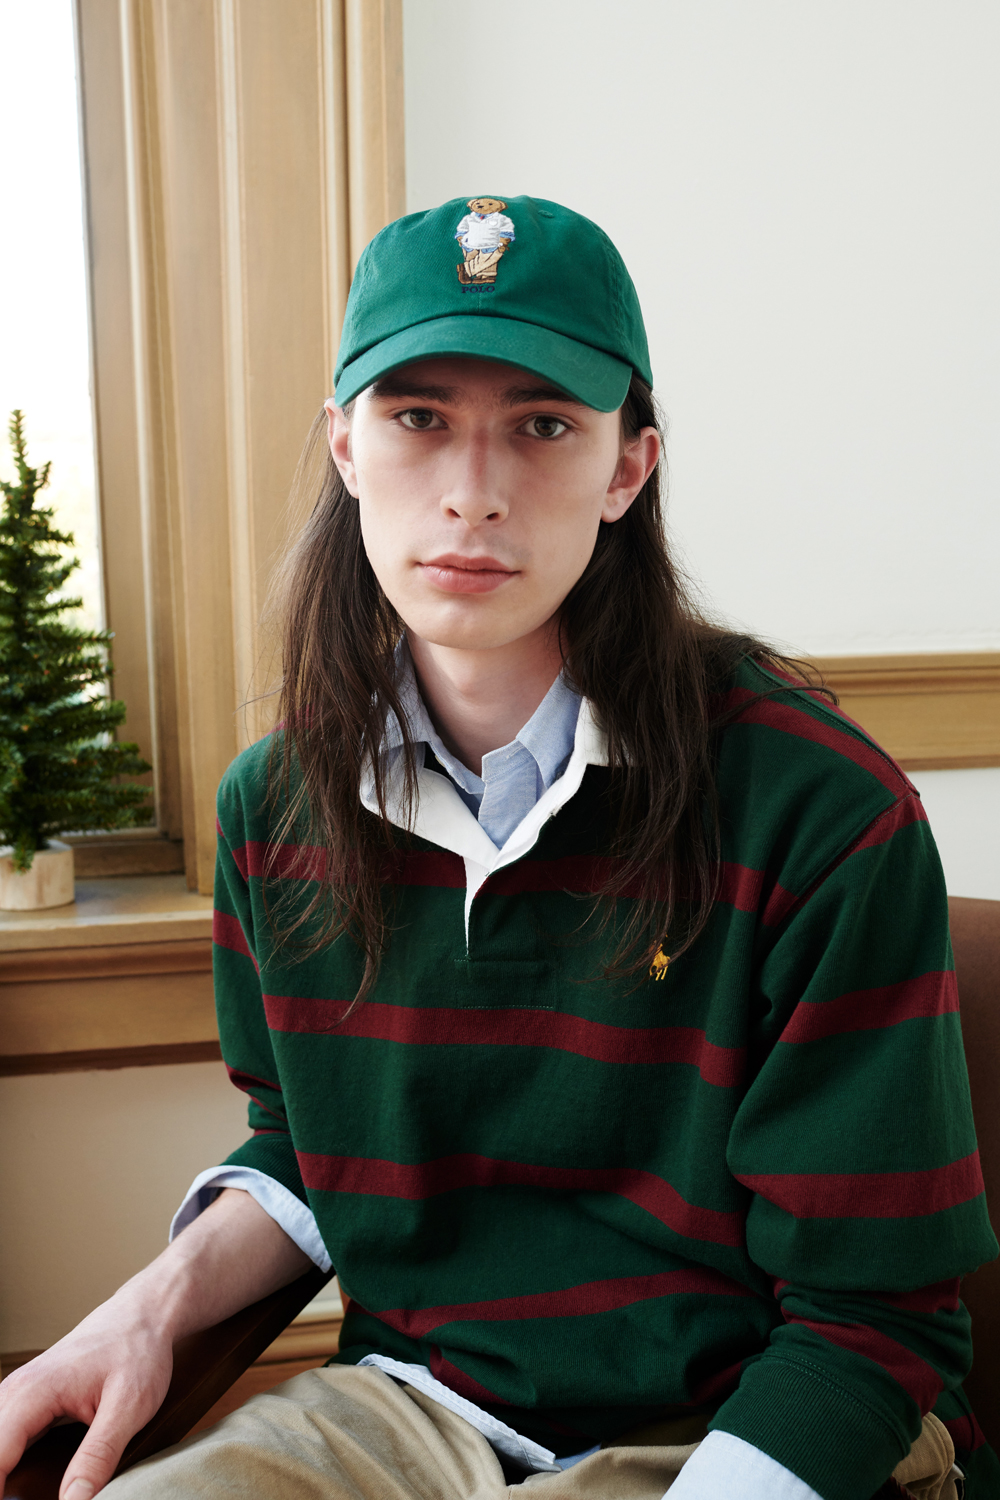 HAT beams The Polo Big Collection